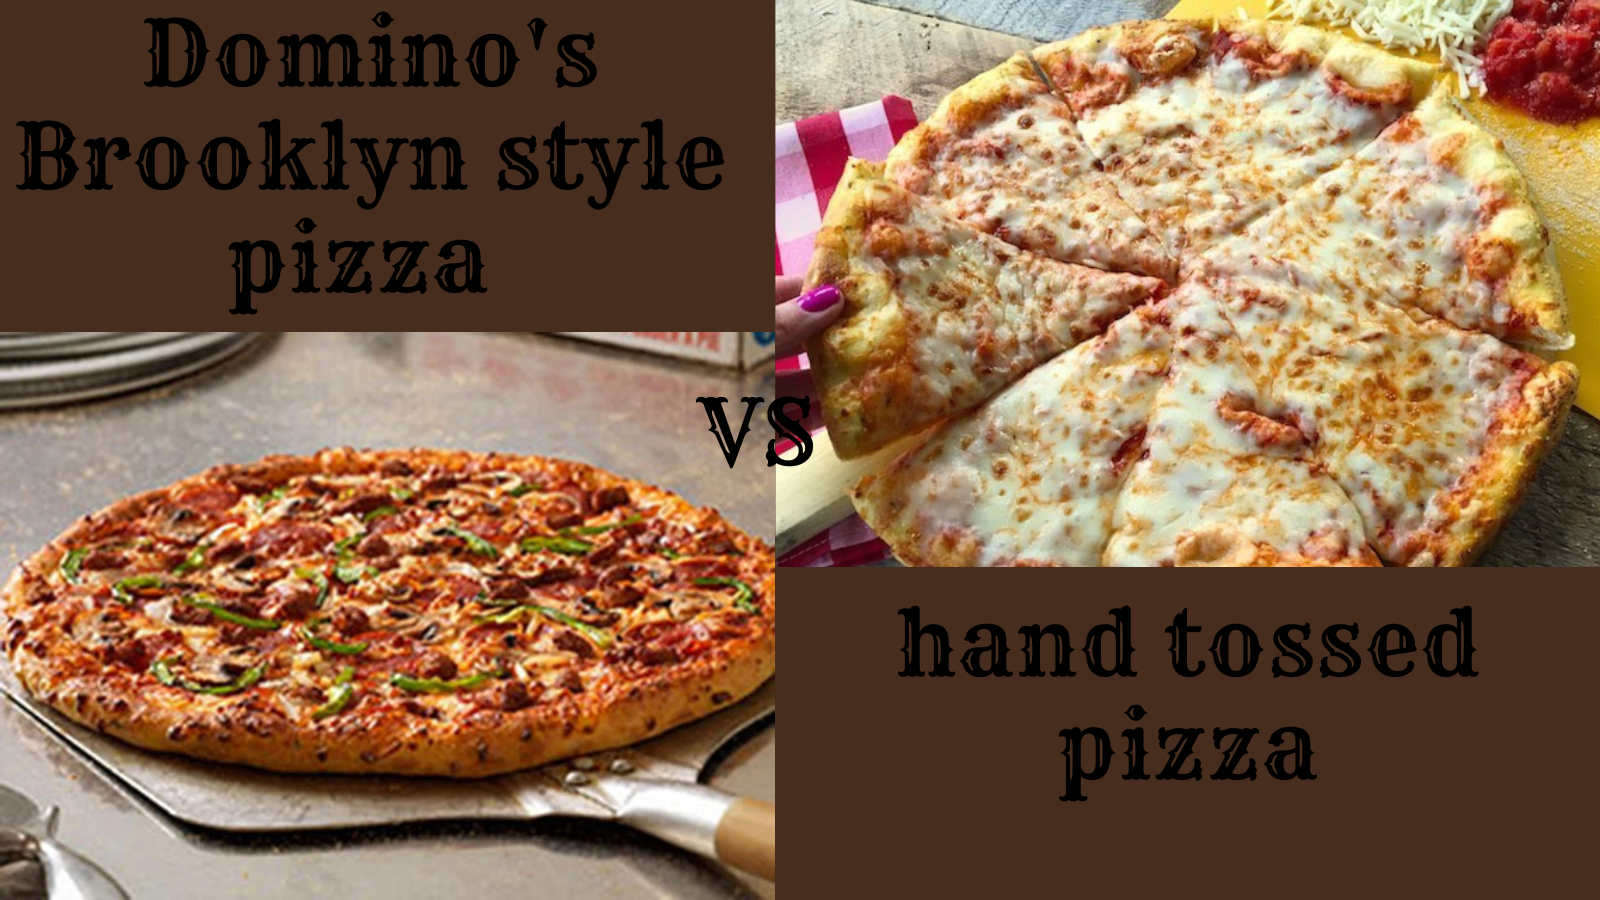 Domino's Brooklyn style pizza vs hand tossed : Different?